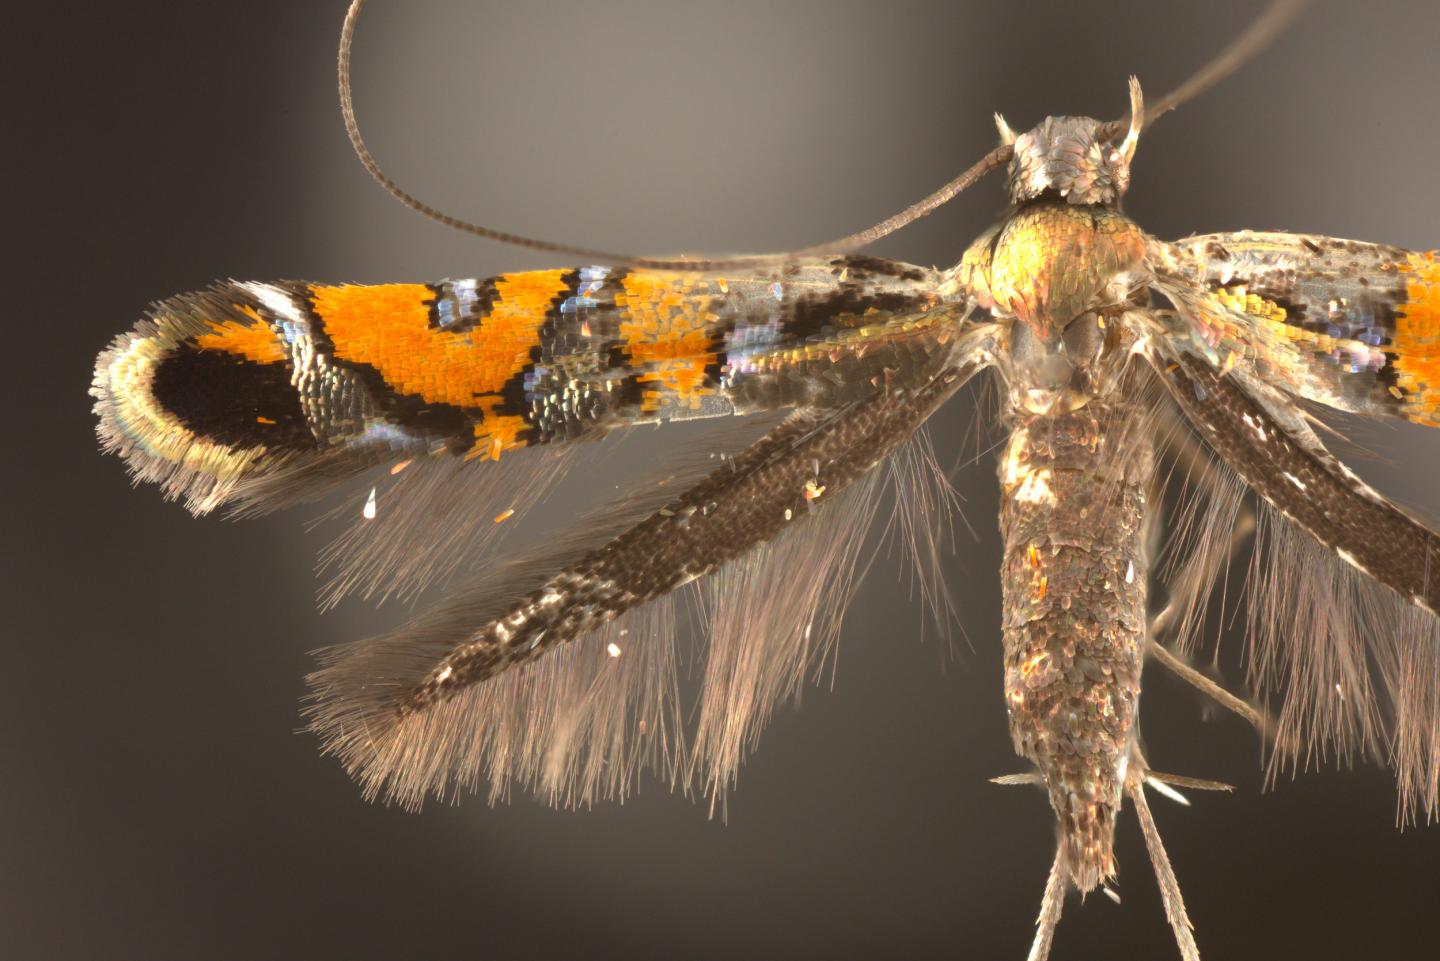 Hawaiian Moths Feature Metallic Scales and Wing Bristles